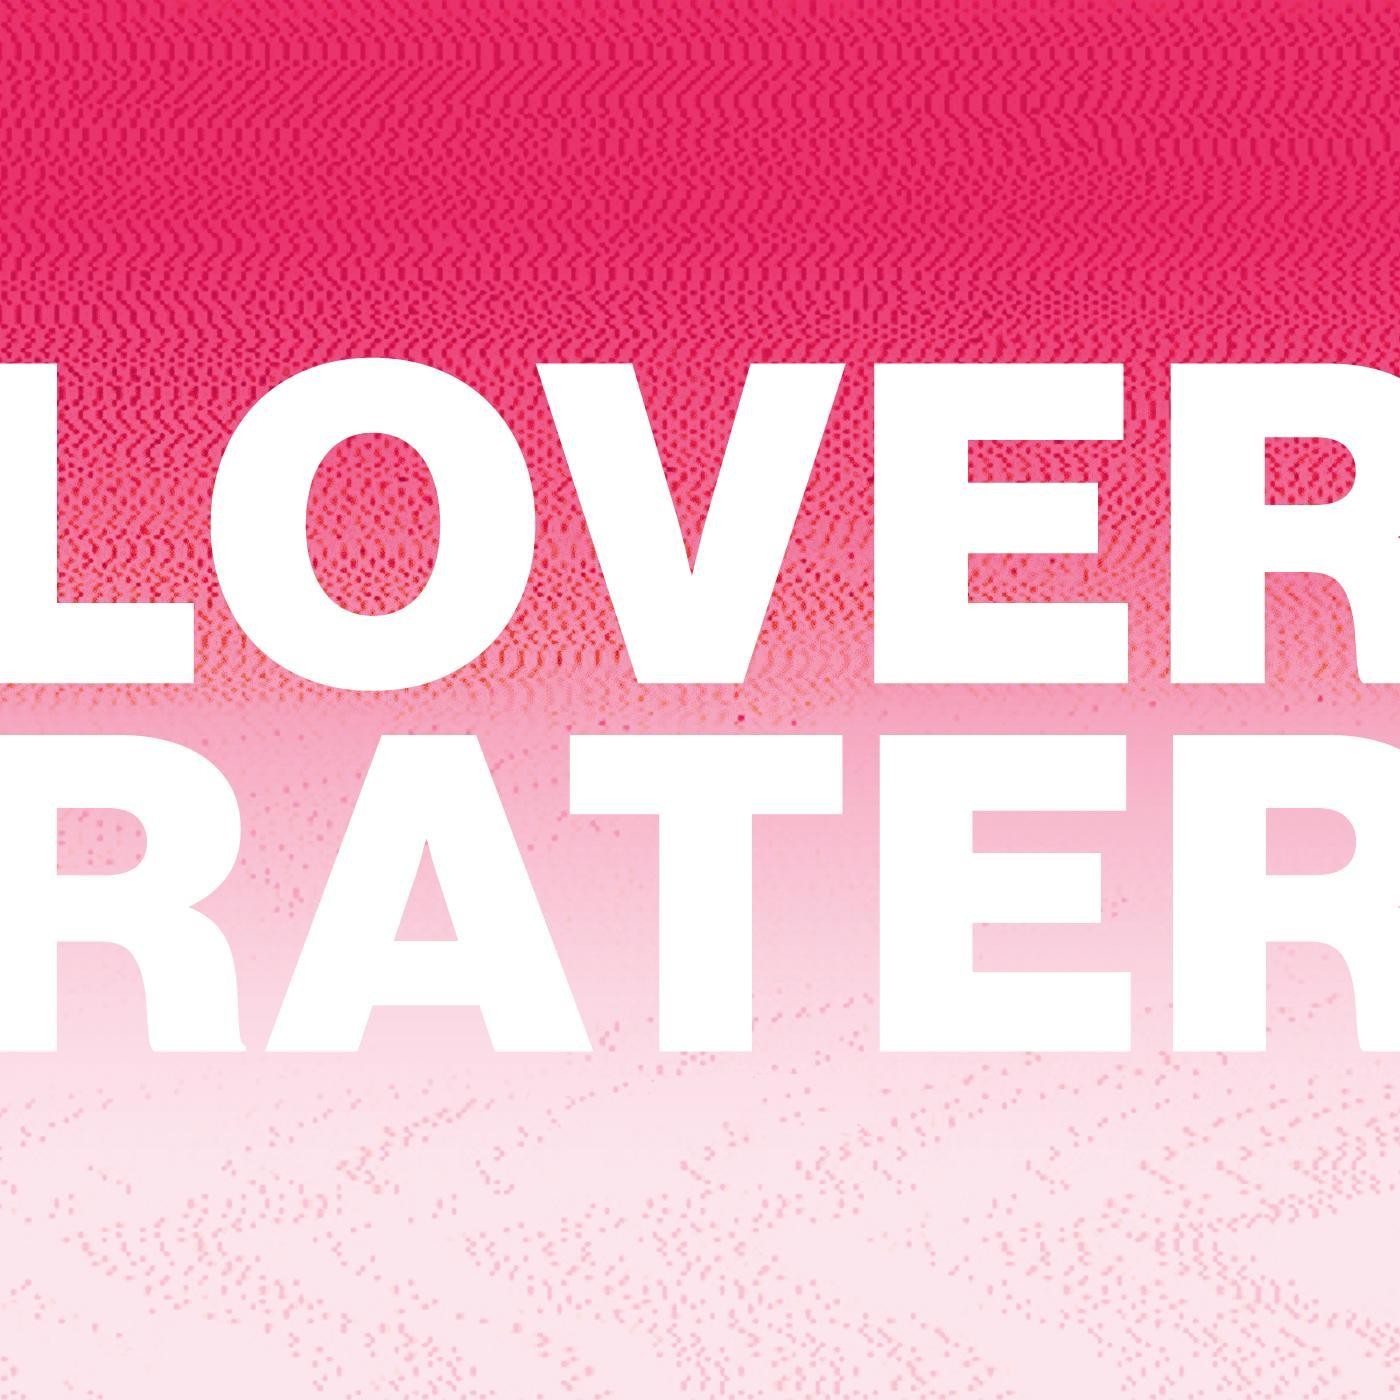 Lover Rater